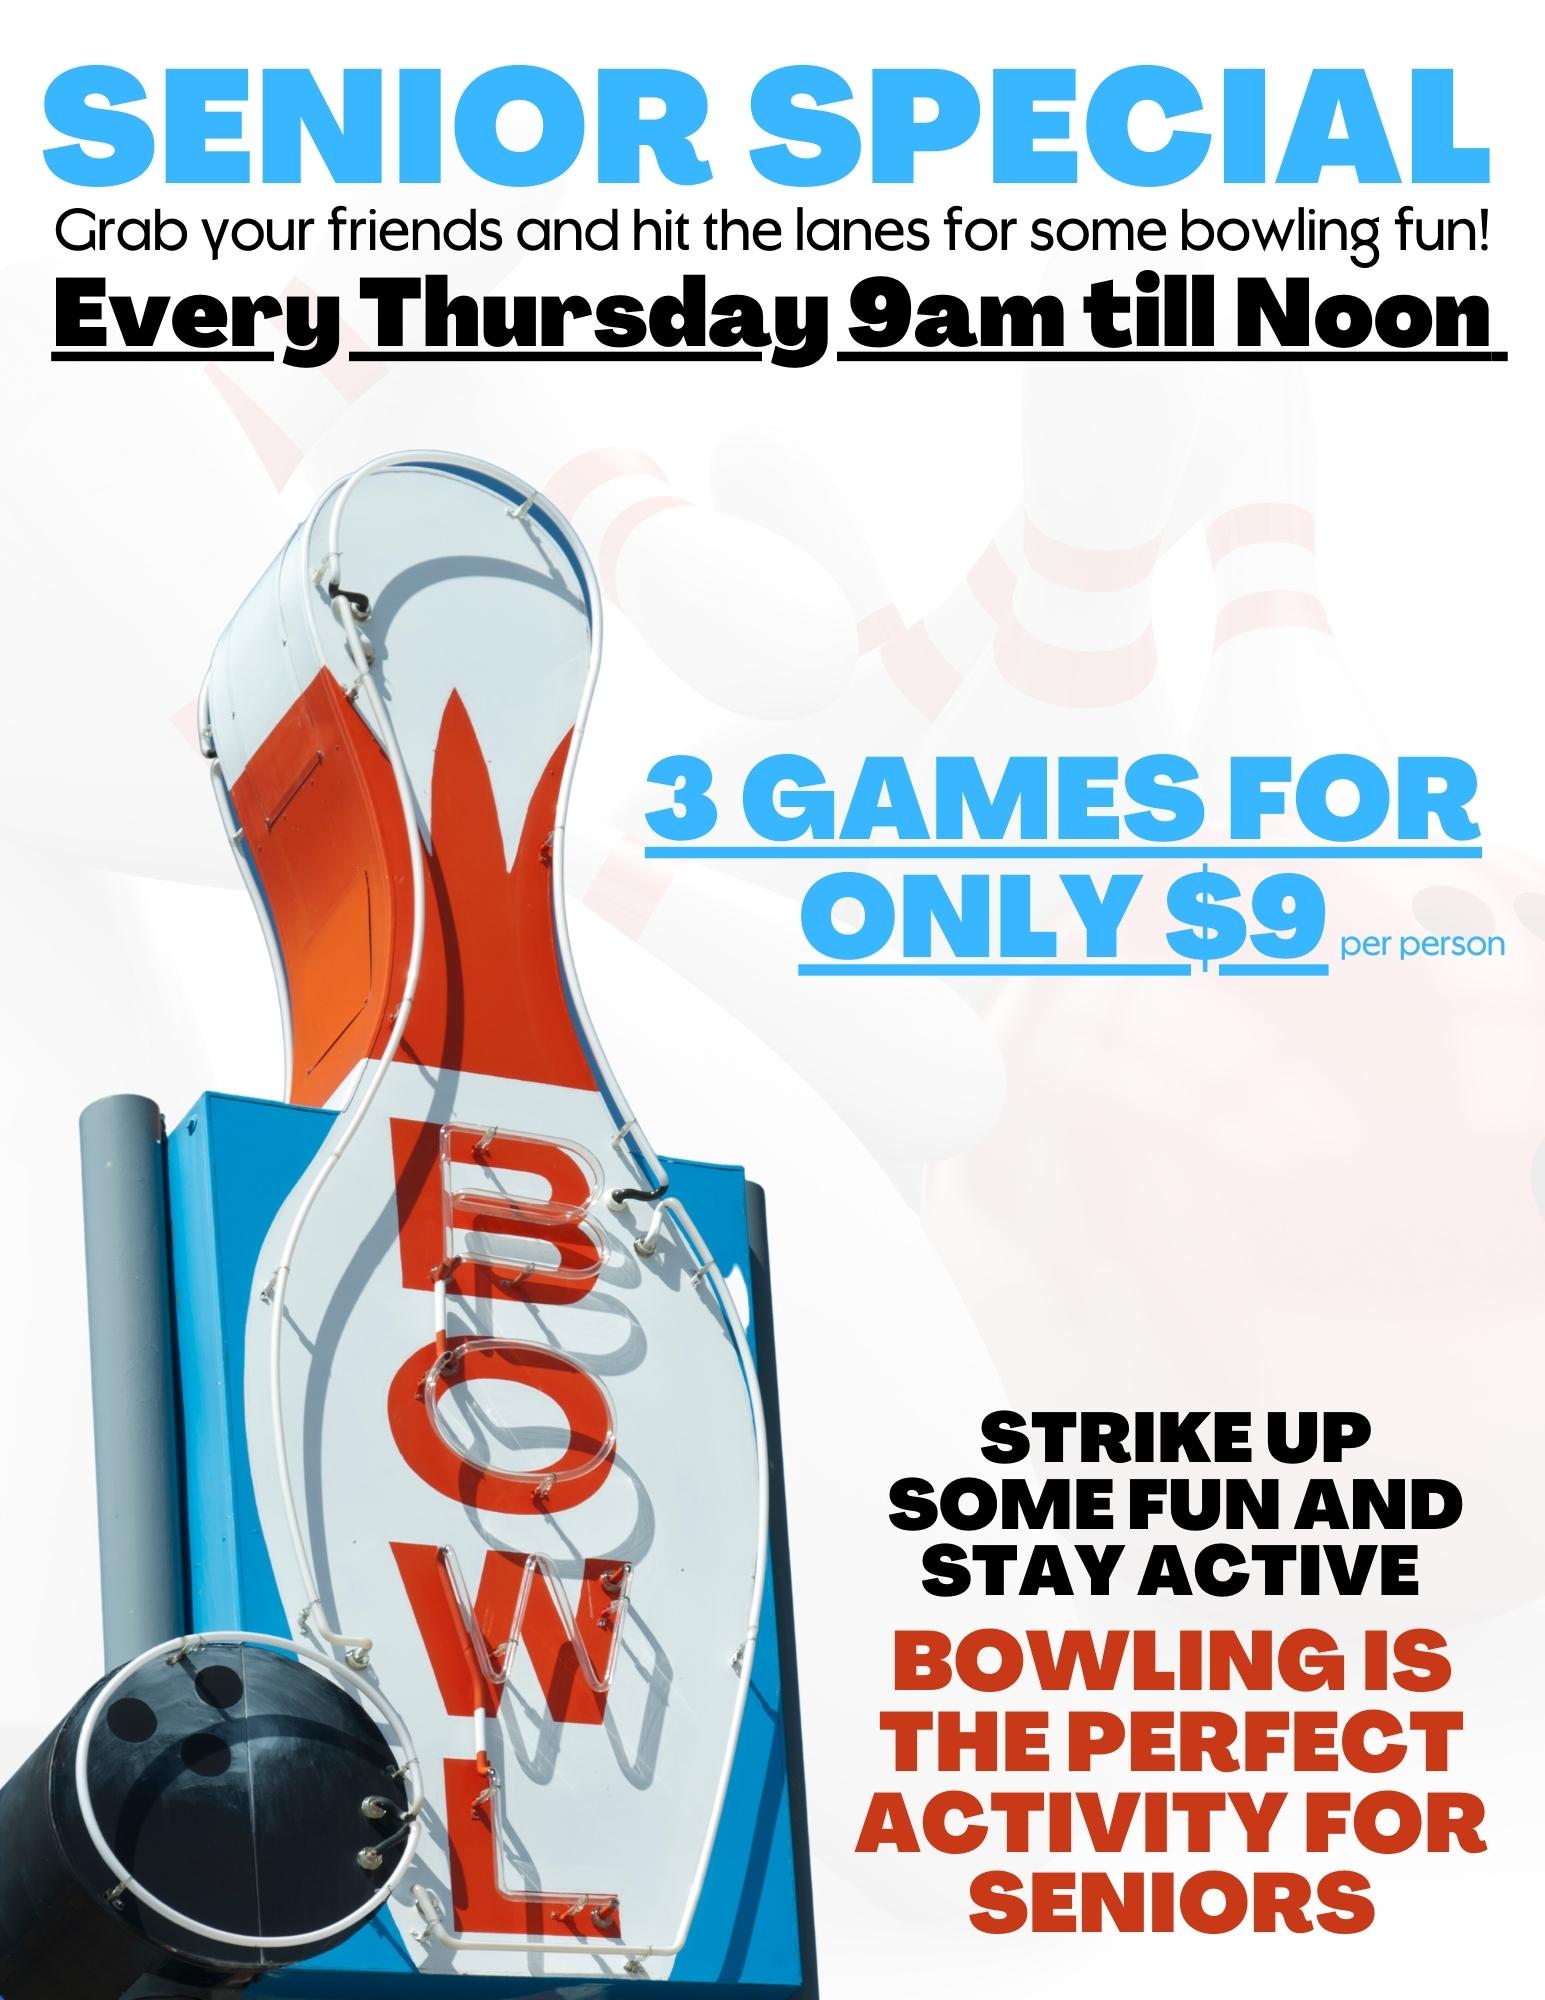 Legendary Summer Specials . . 2 Hours Of Legendary Fun For Only $600.00  Bowling-Karaoke-Laser Tag-4ps5 . WE WILL ROLL THE FUN TO YOU BOOK TODAY  DONT, By The Legendary Strikes